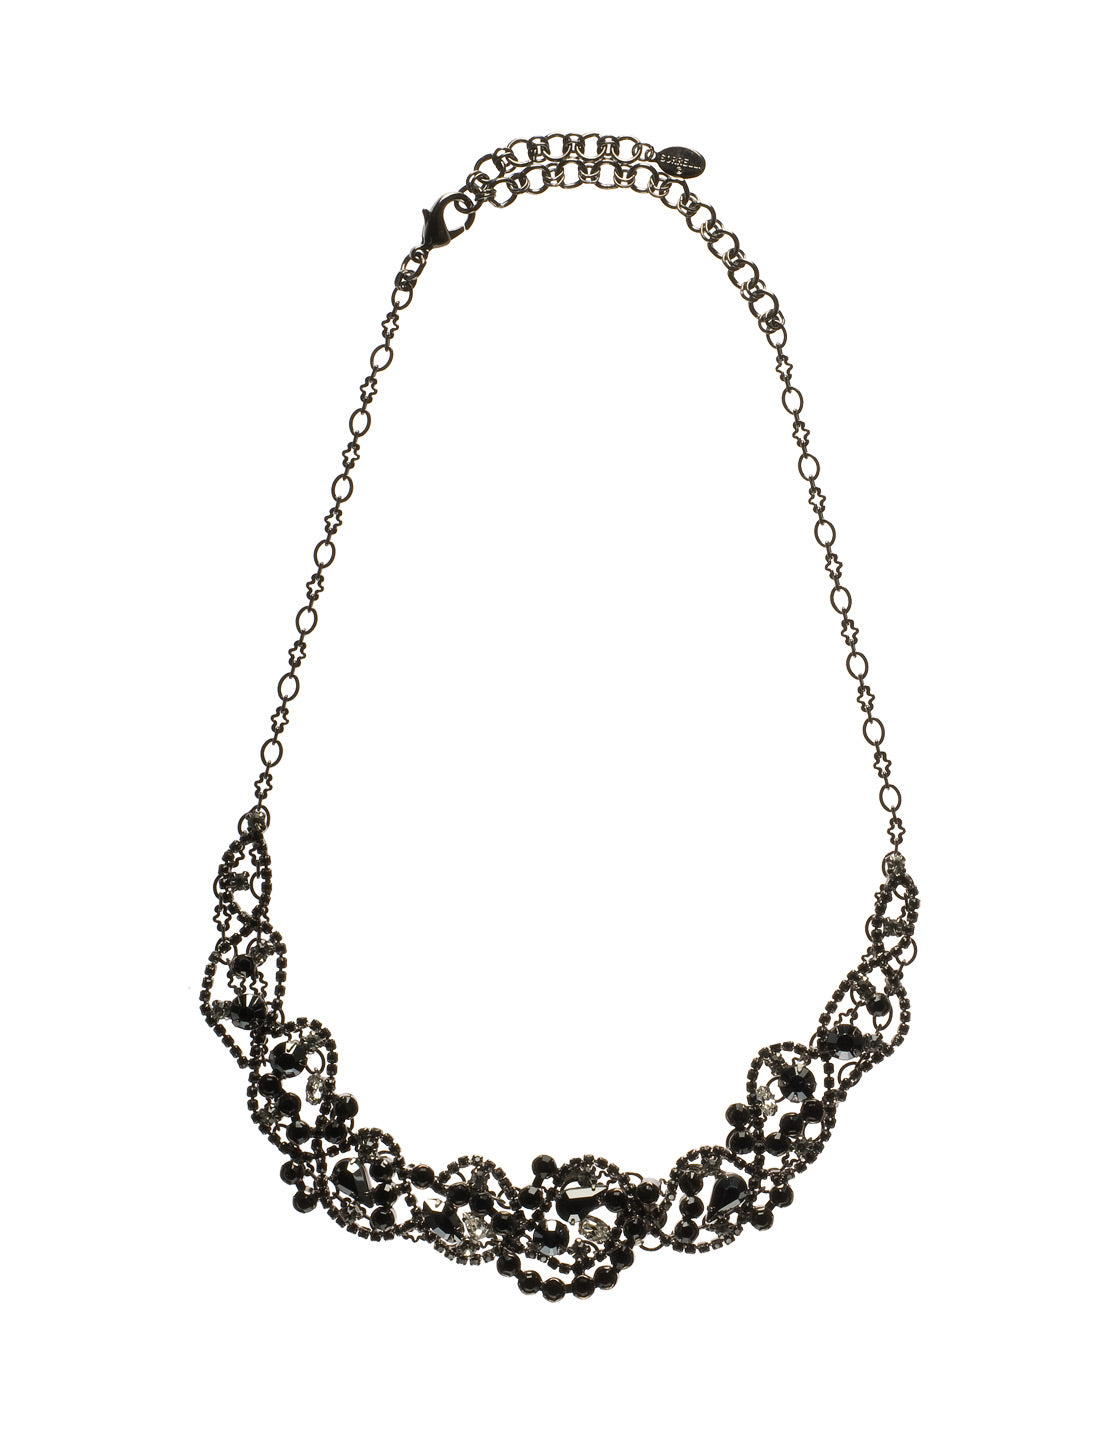 Intertwined Crystal Necklace - NCE7GMMMO -  From Sorrelli's Midnight Moon collection in our Gun Metal finish.